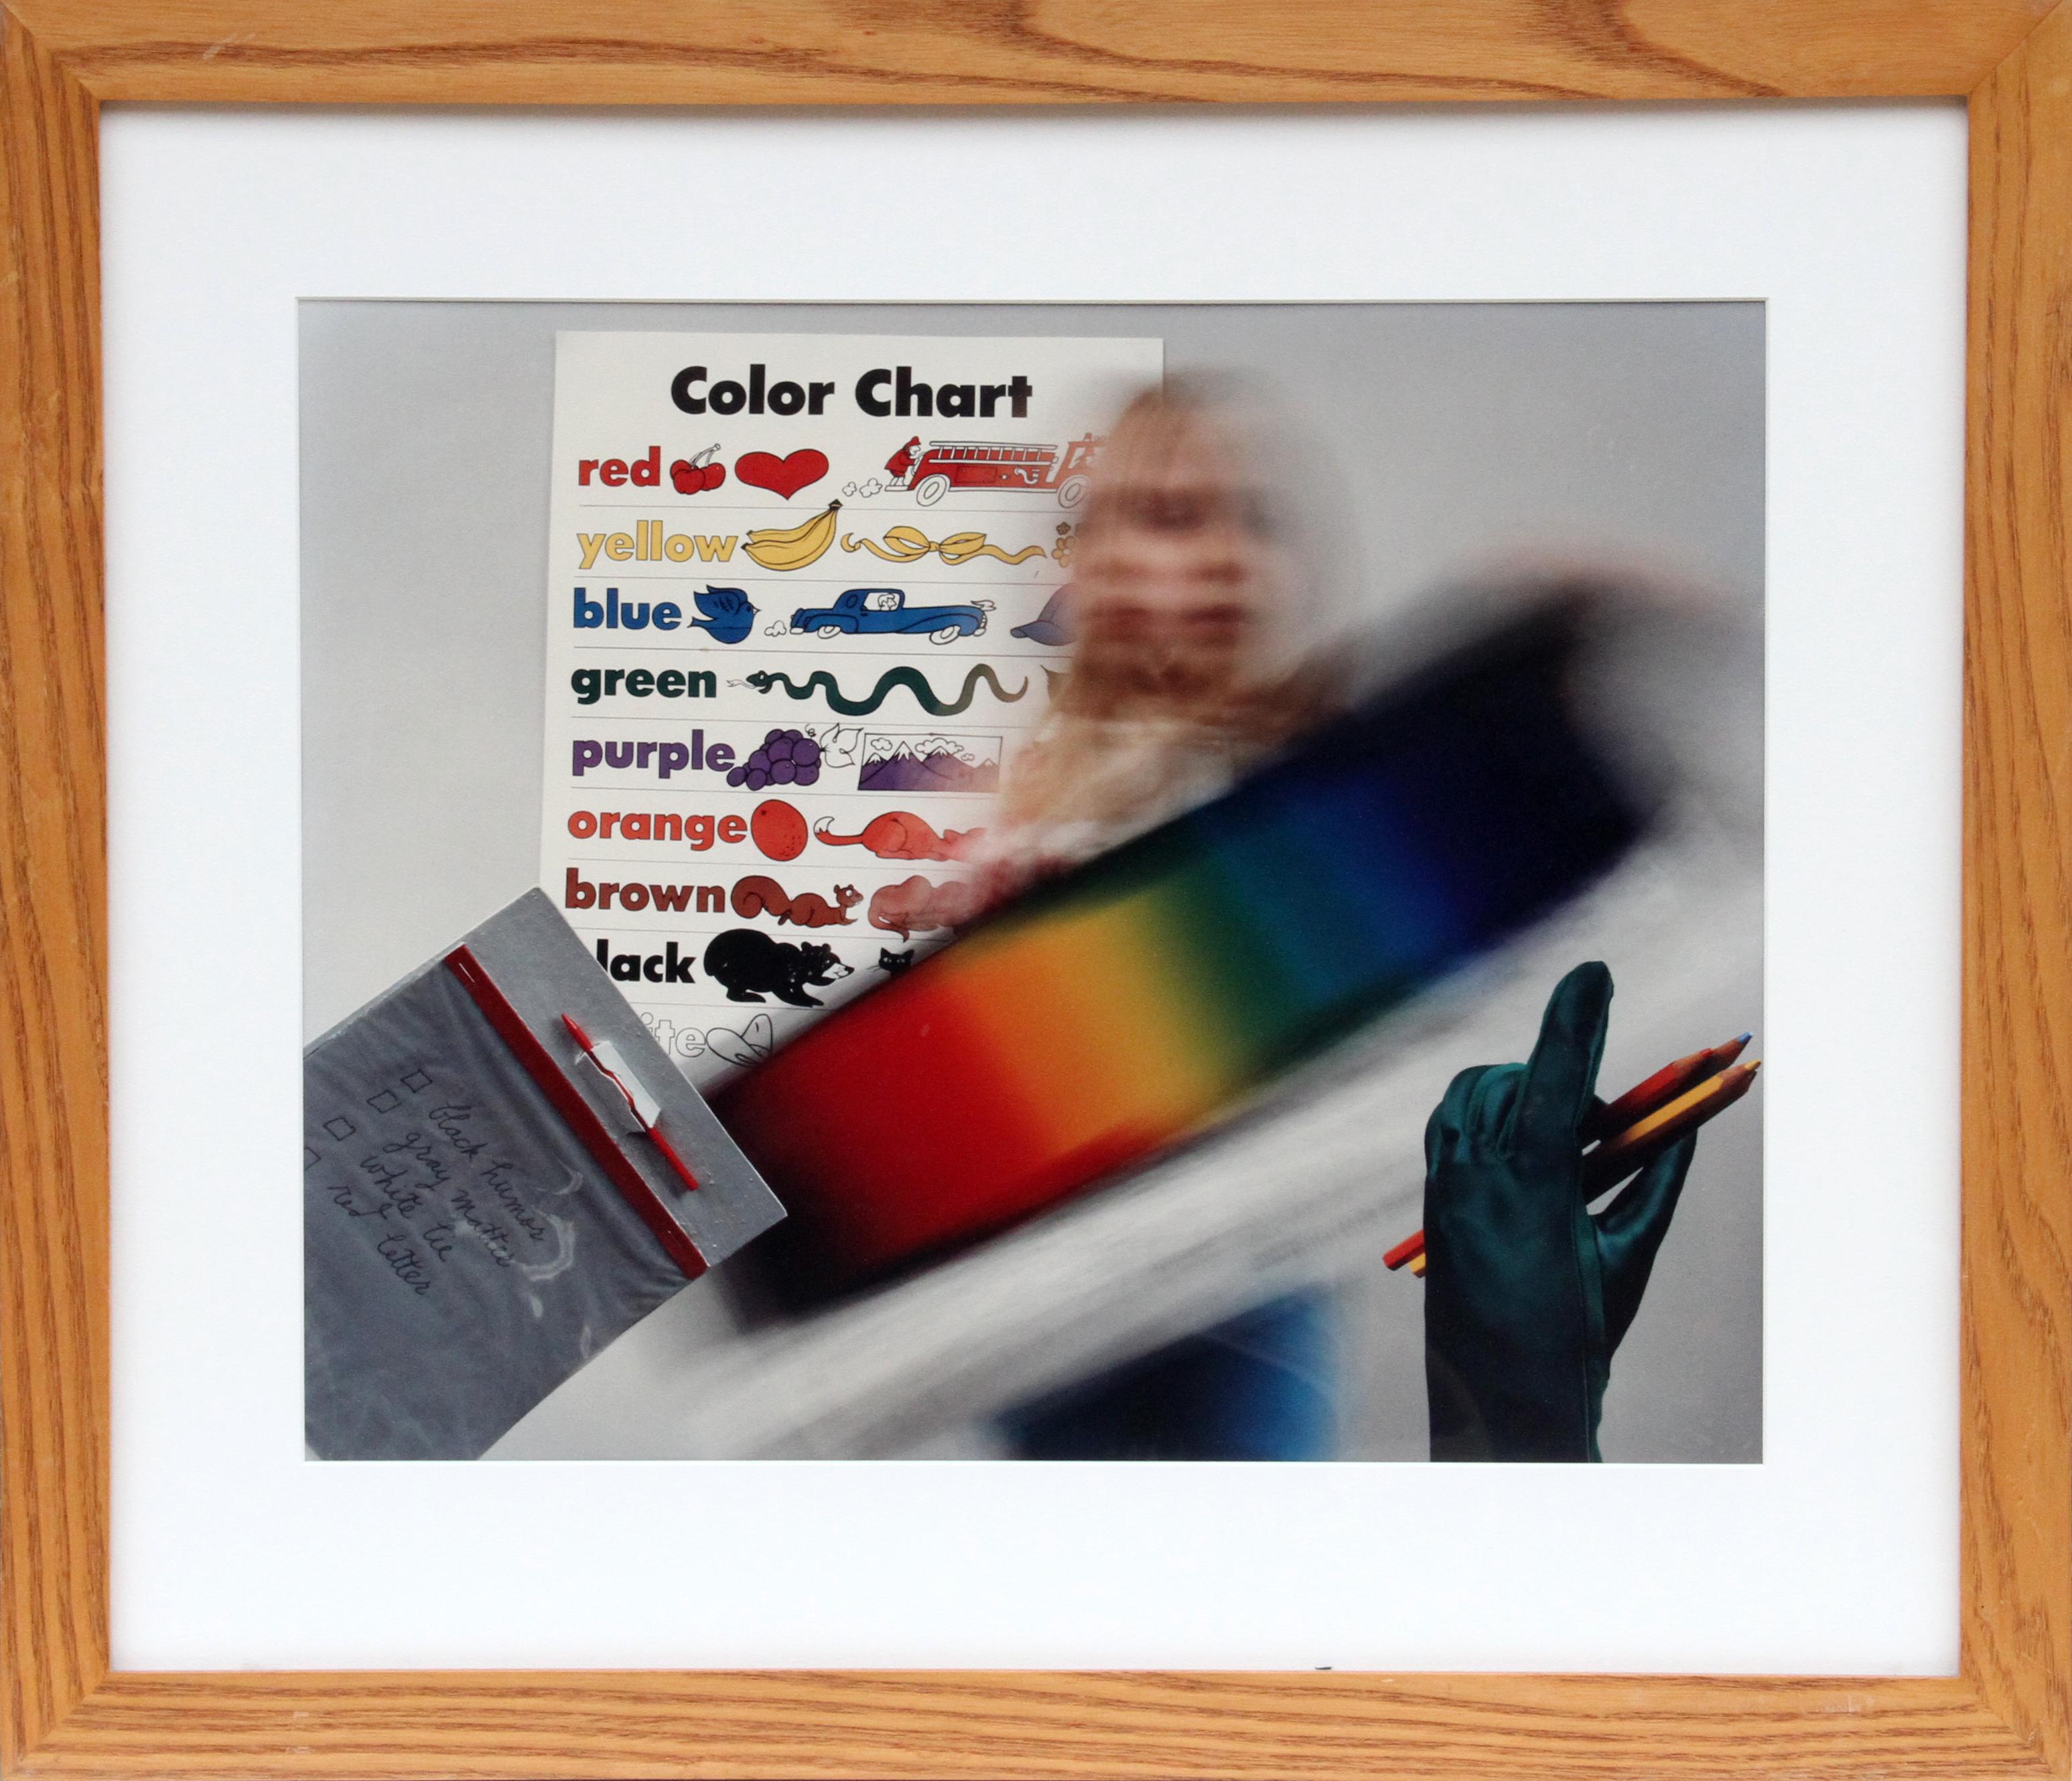 "Color Chart", 1982, Color Photograph by Anne Turyn